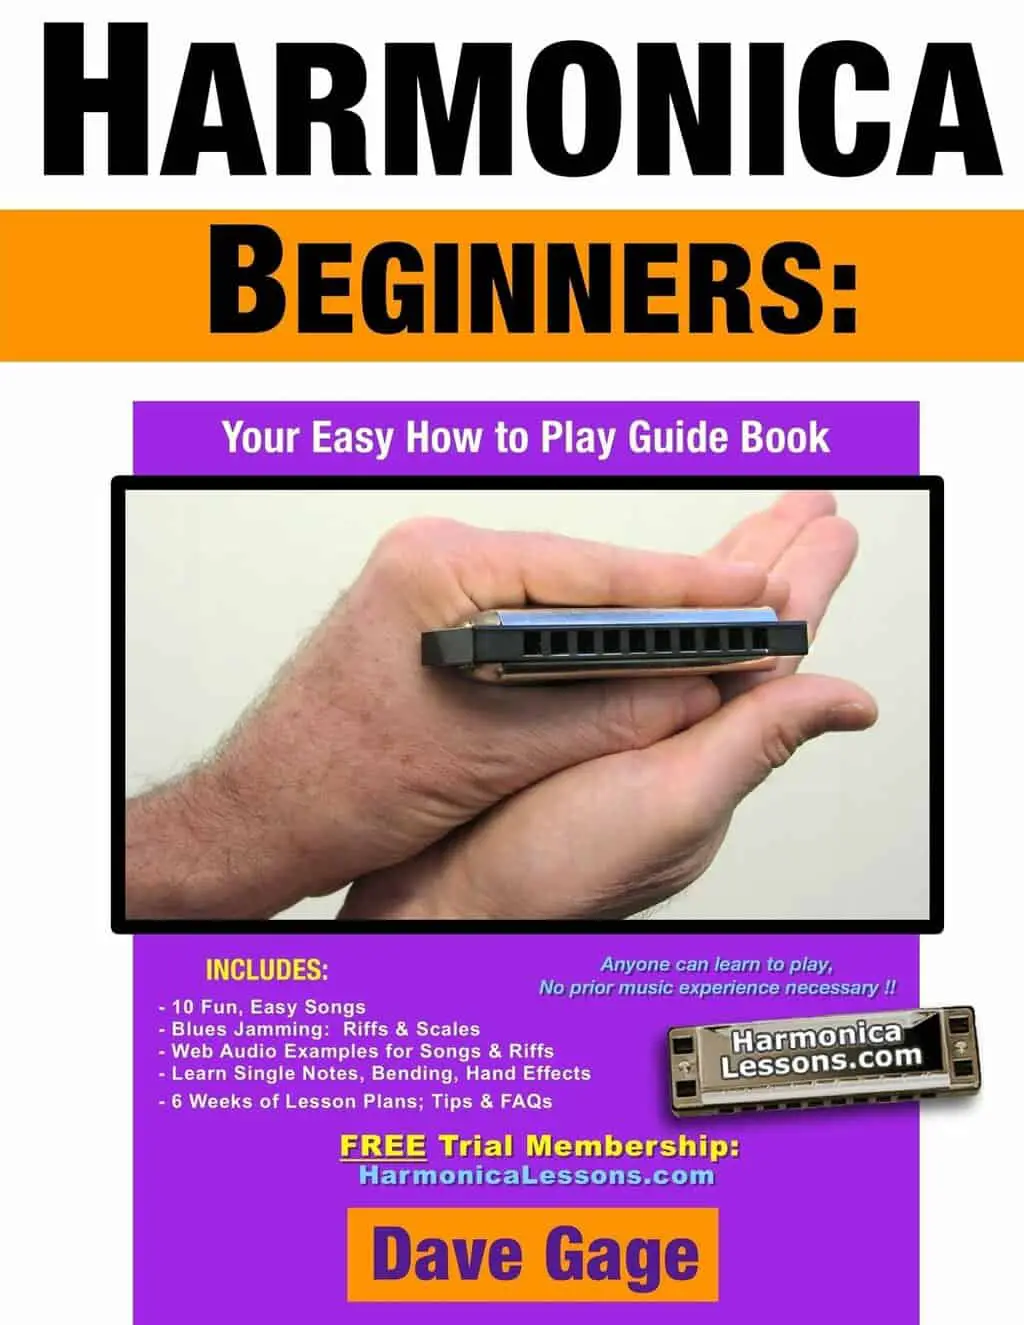 Basic Techniques For Playing The Harmonica